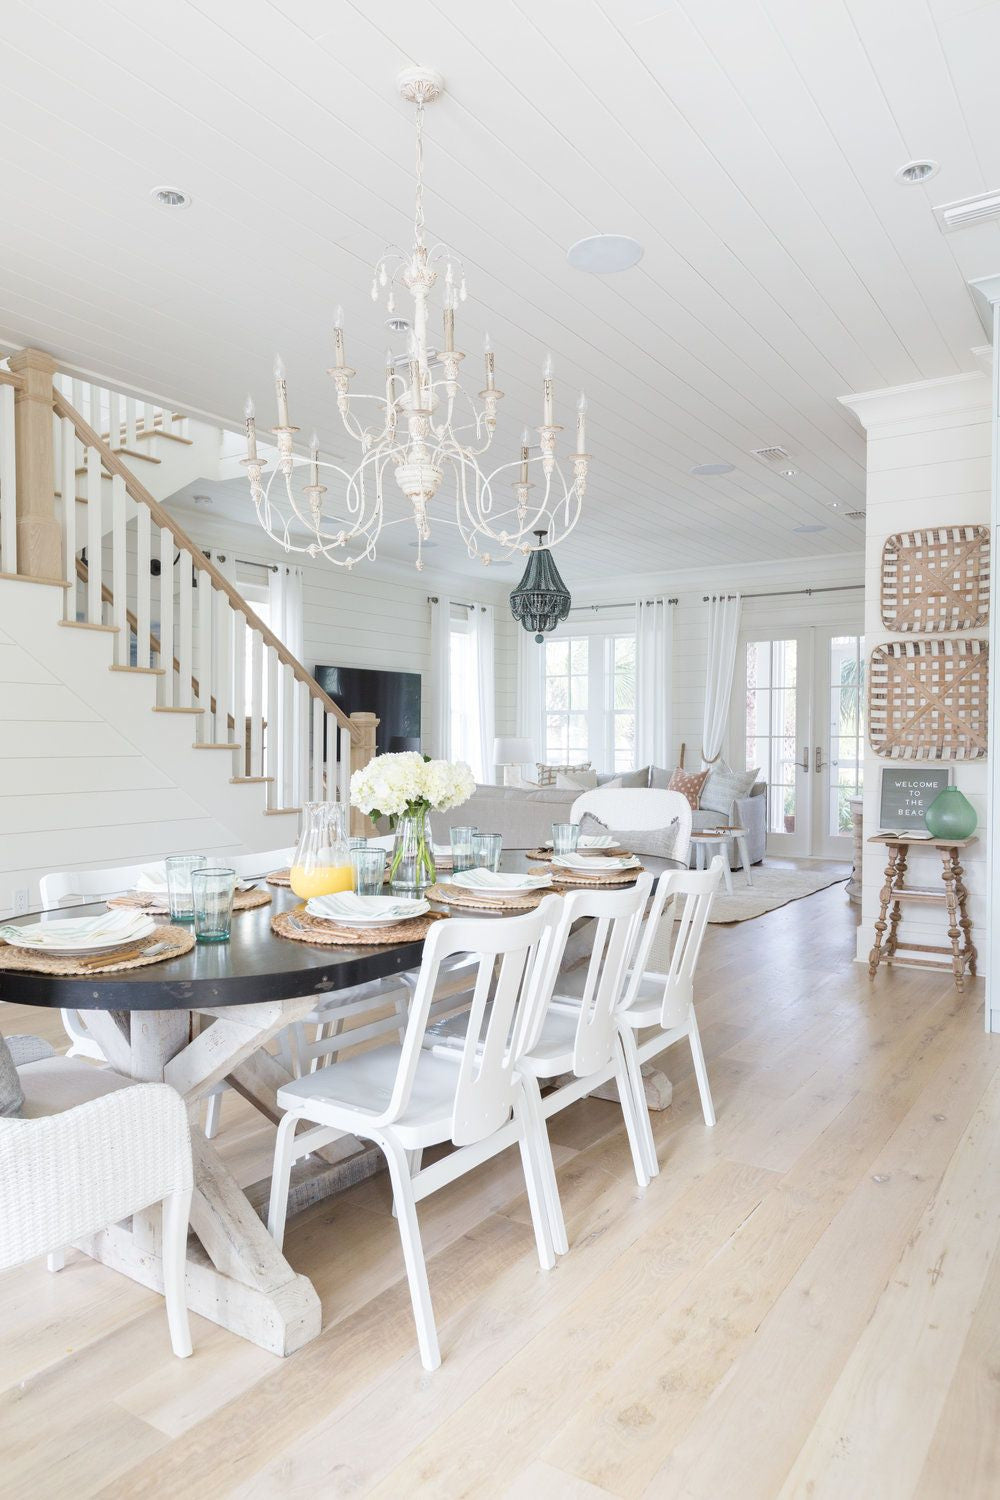 Dream Beach Houses To Drive Your Decor Inspiration